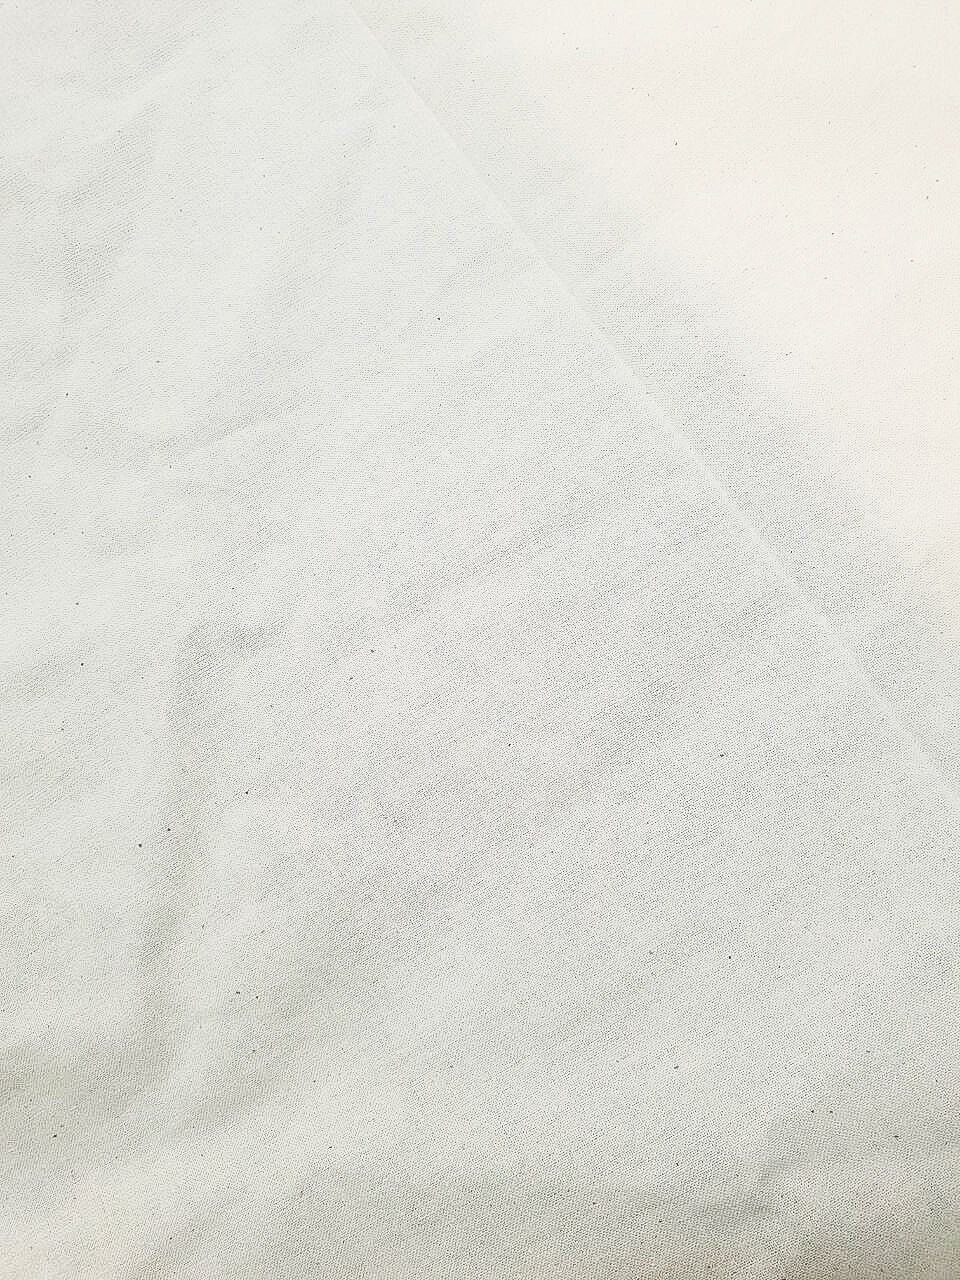 100% Recycled Cotton Lightweight Calico Fabric 80gsm